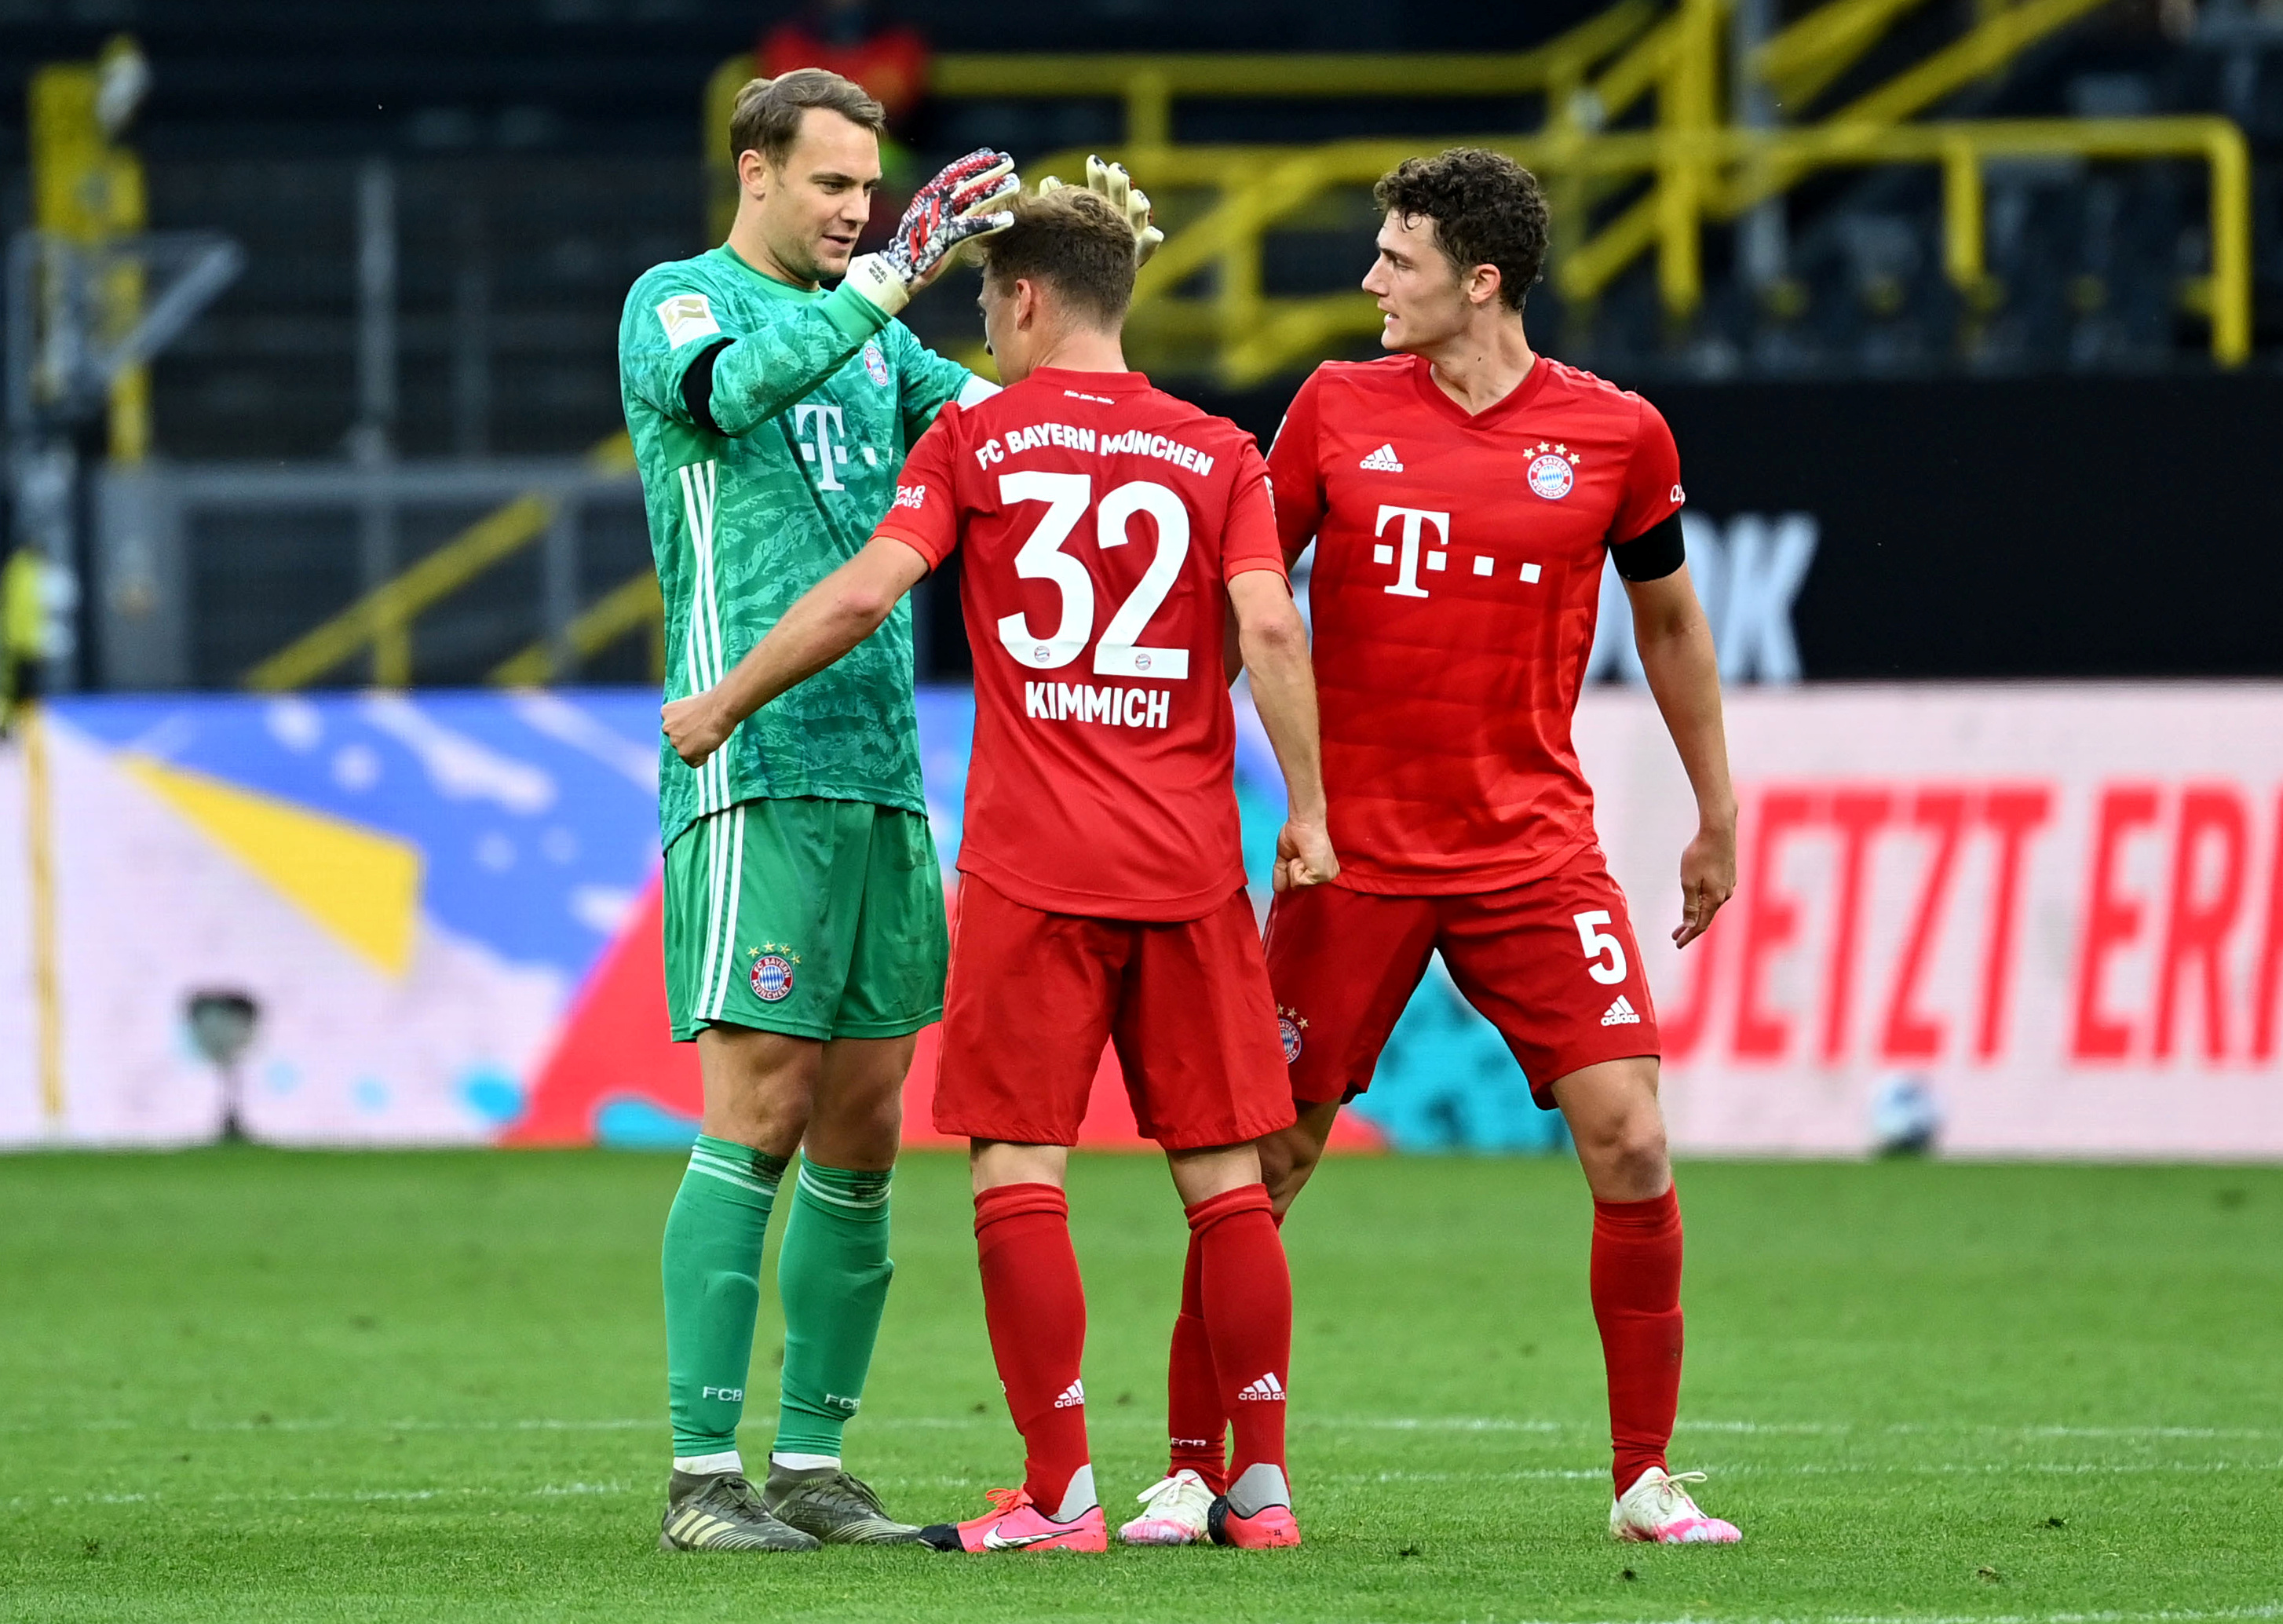 Bayern Munich's Manuel Neuer, Joshua Kimmich and Benjamin Pavard celebrates after the match, as play resumes behind closed doors following the outbreak of the coronavirus disease (COVID-19) during the Bundesliga match between Borussia Dortmund and  Bayern Munich, at Signal Iduna Park, in Dortmund, Germany, on May 26, 2020. Photo: Federico Gambarini/Pool via Reutersn